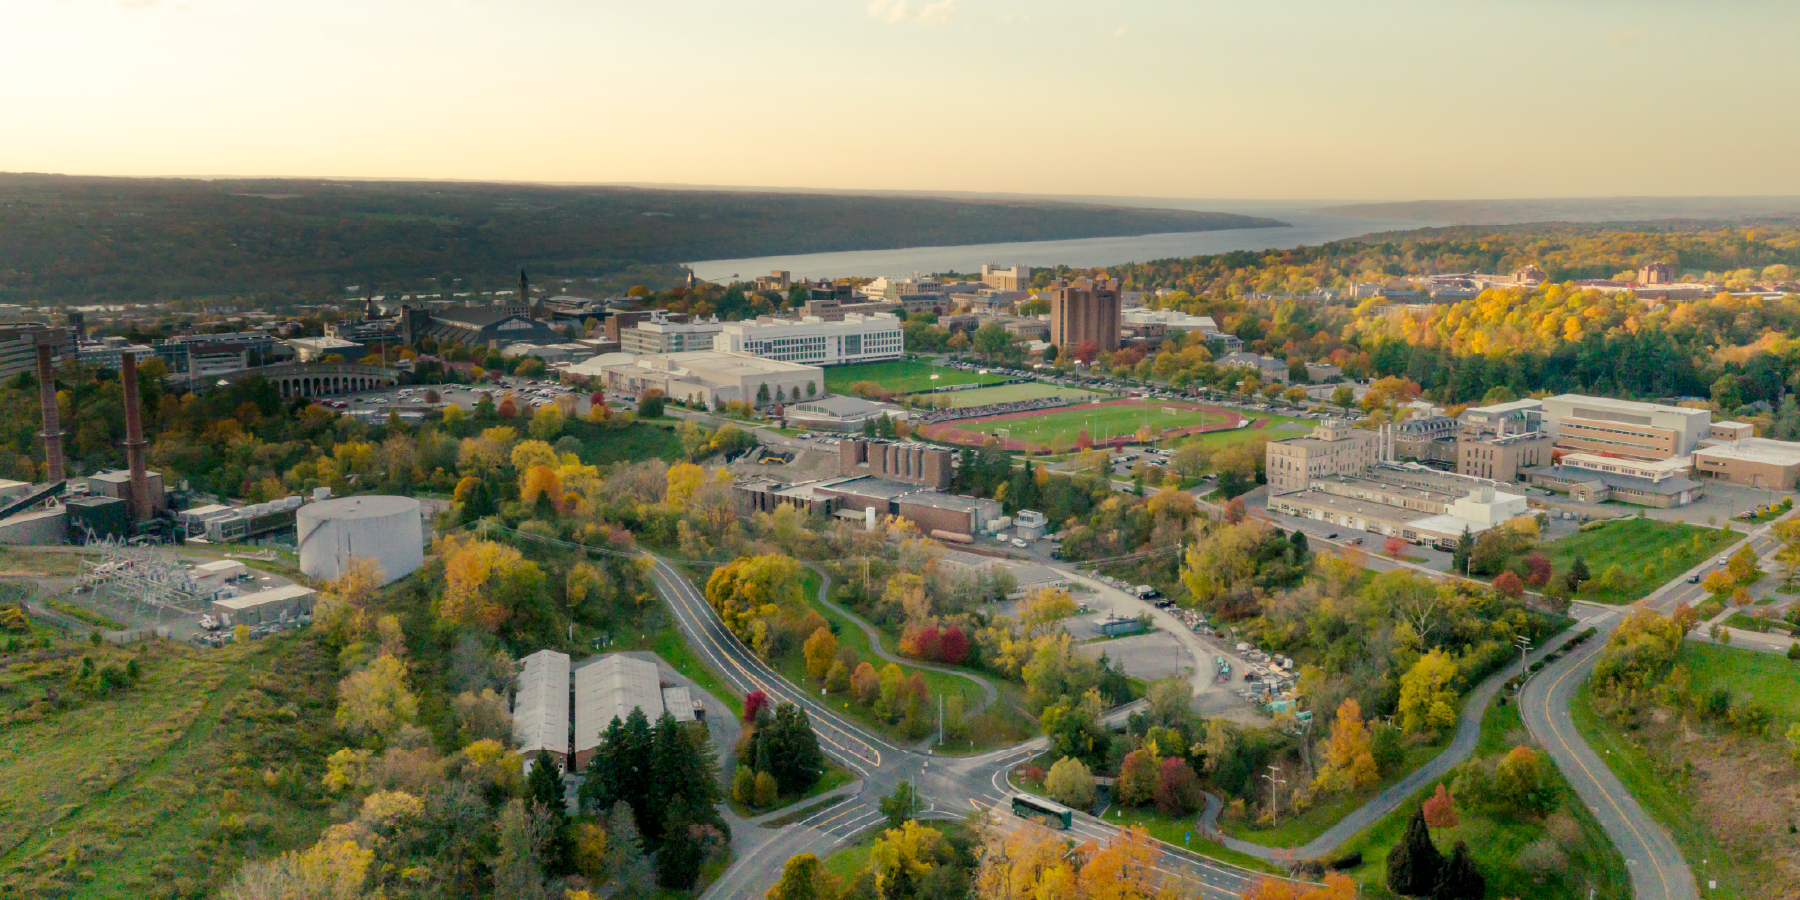 Aerial image of Wilson Lab and the Cornell campus